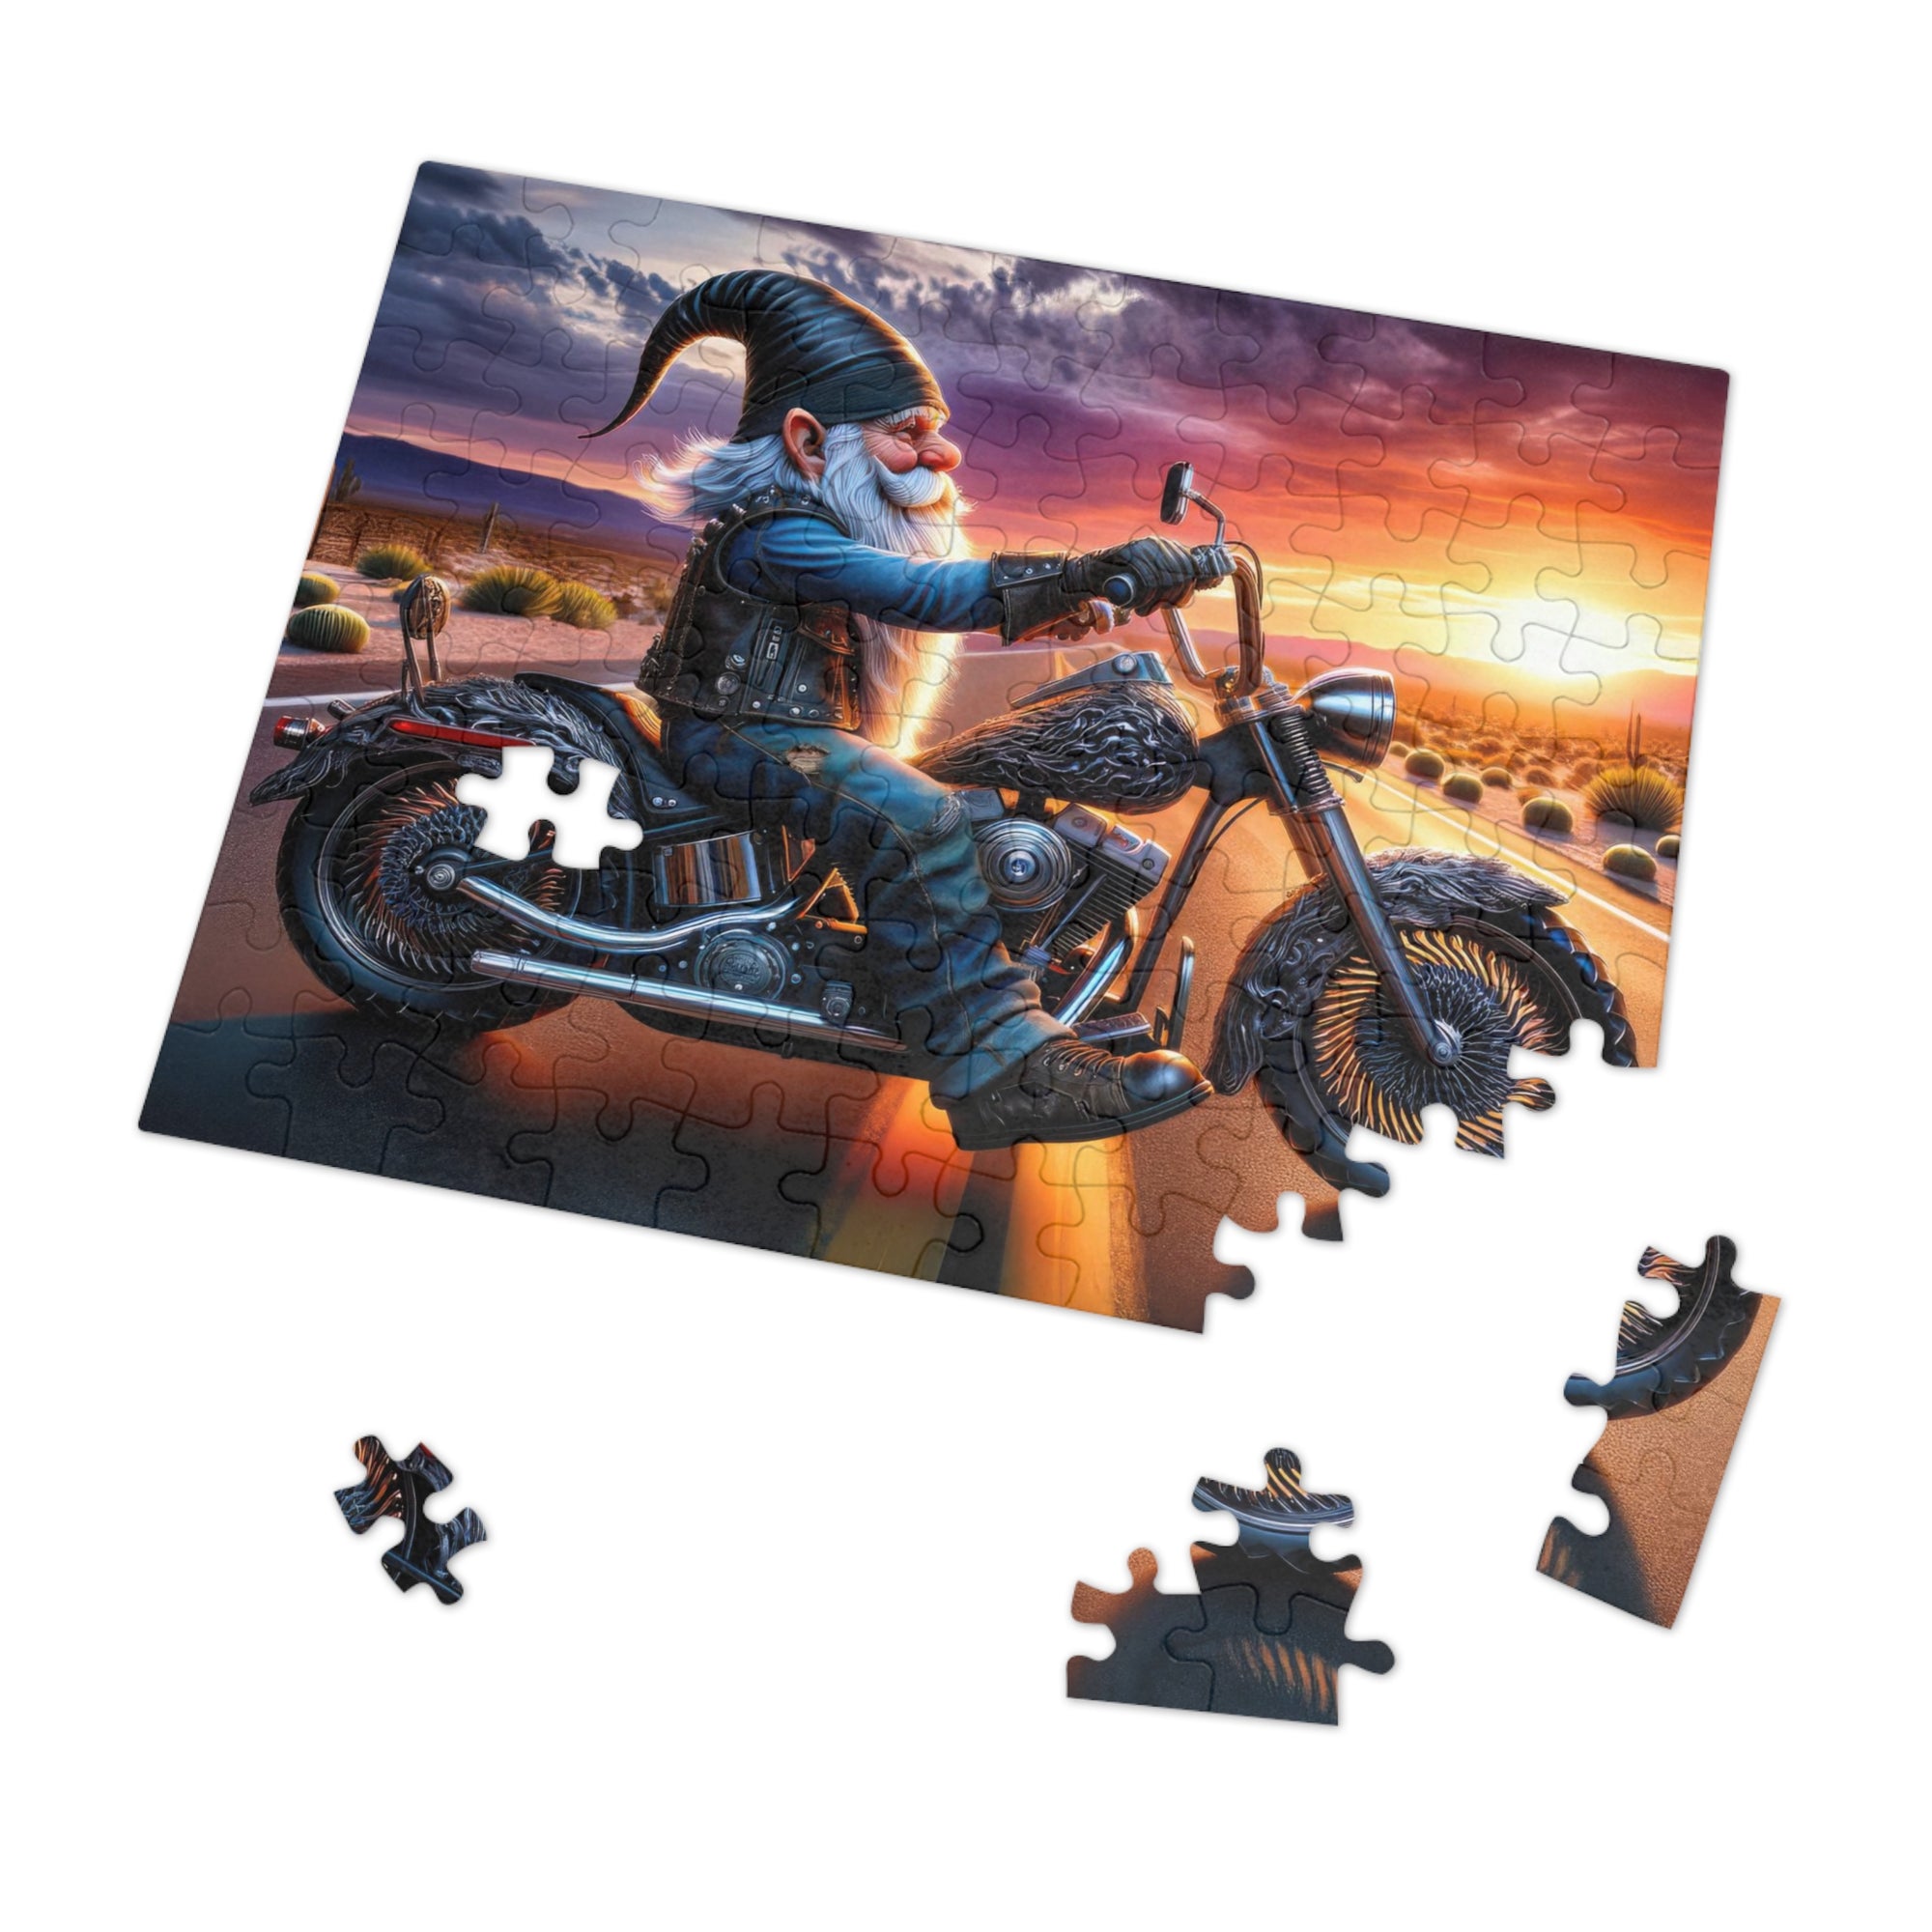 A Gnome's Highway to Adventure Jigsaw Puzzle